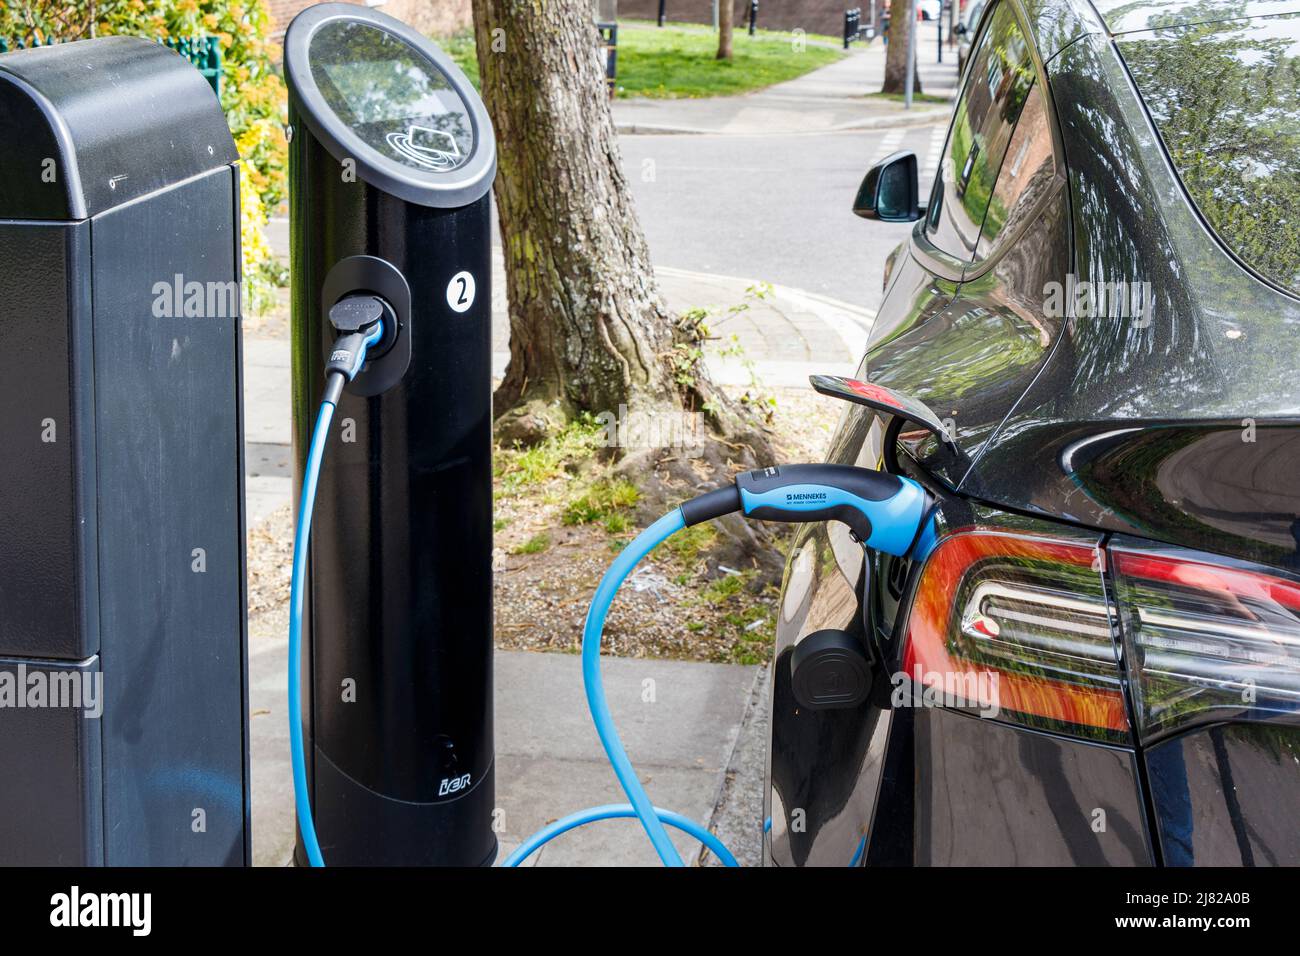 An electric vehicle recharging at a roadside recharging point,  London, UK Stock Photo